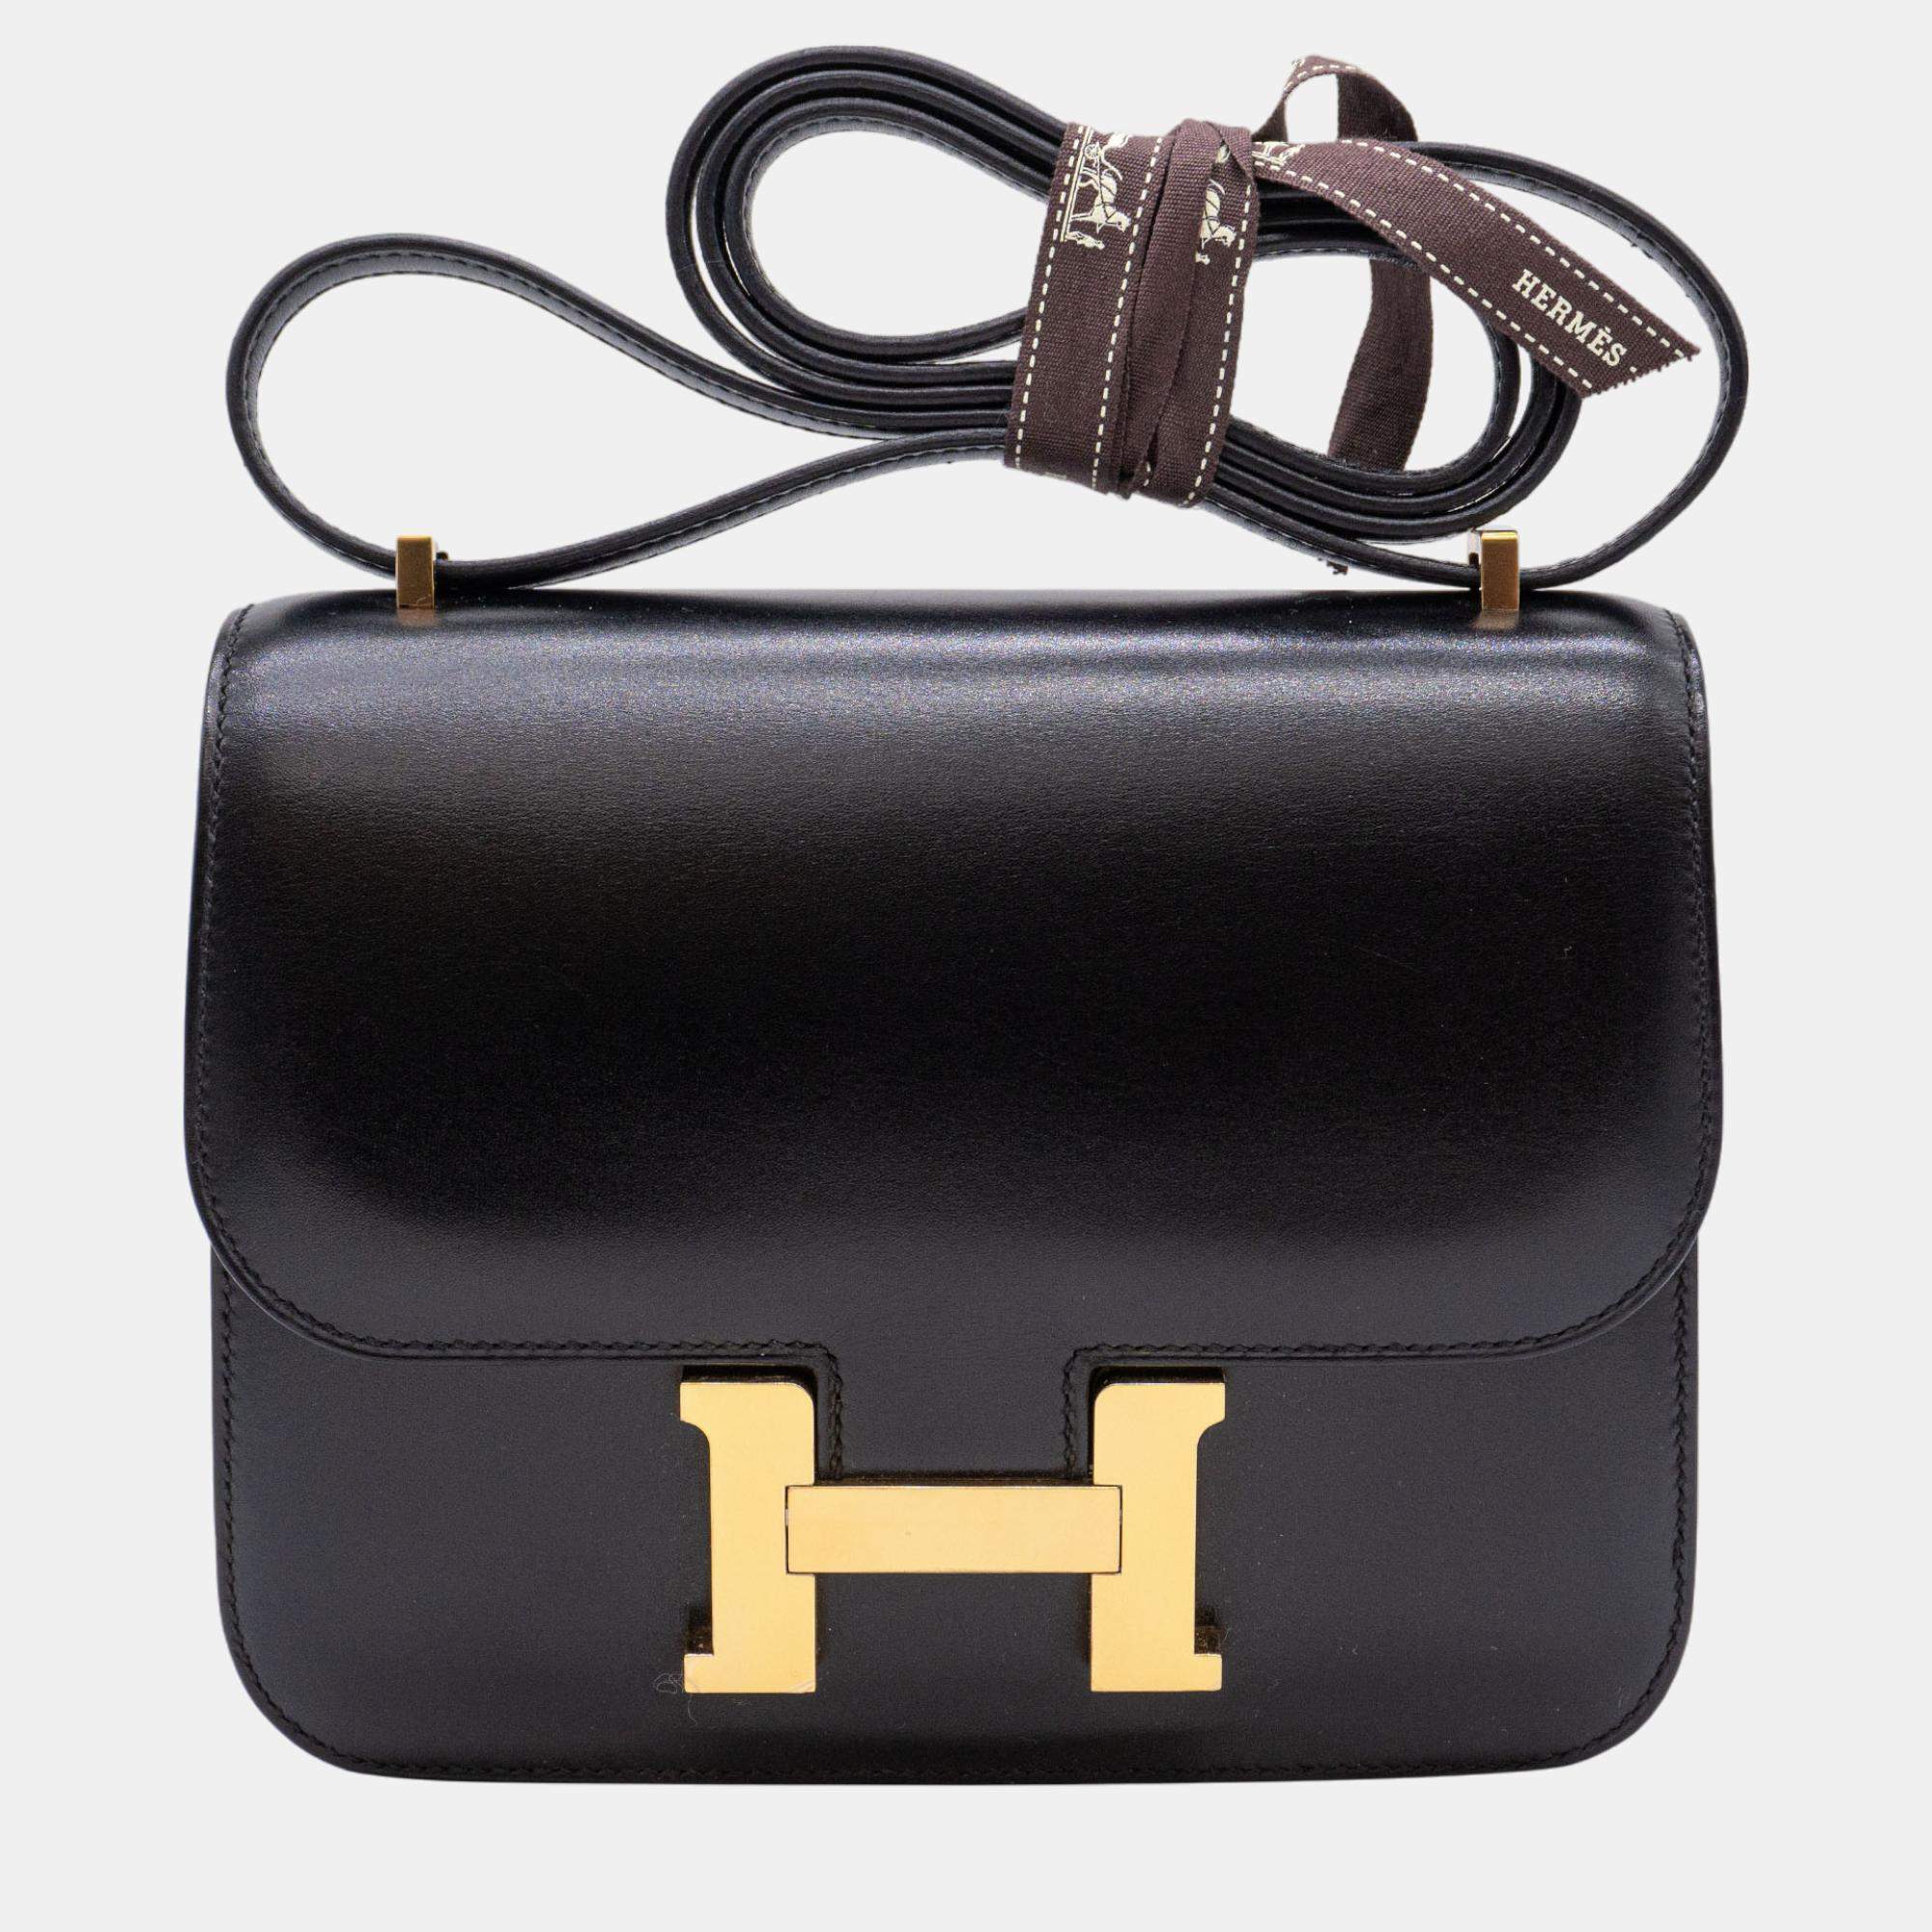 Hermès Constance 18 Box Calf Leather with GHW Bag